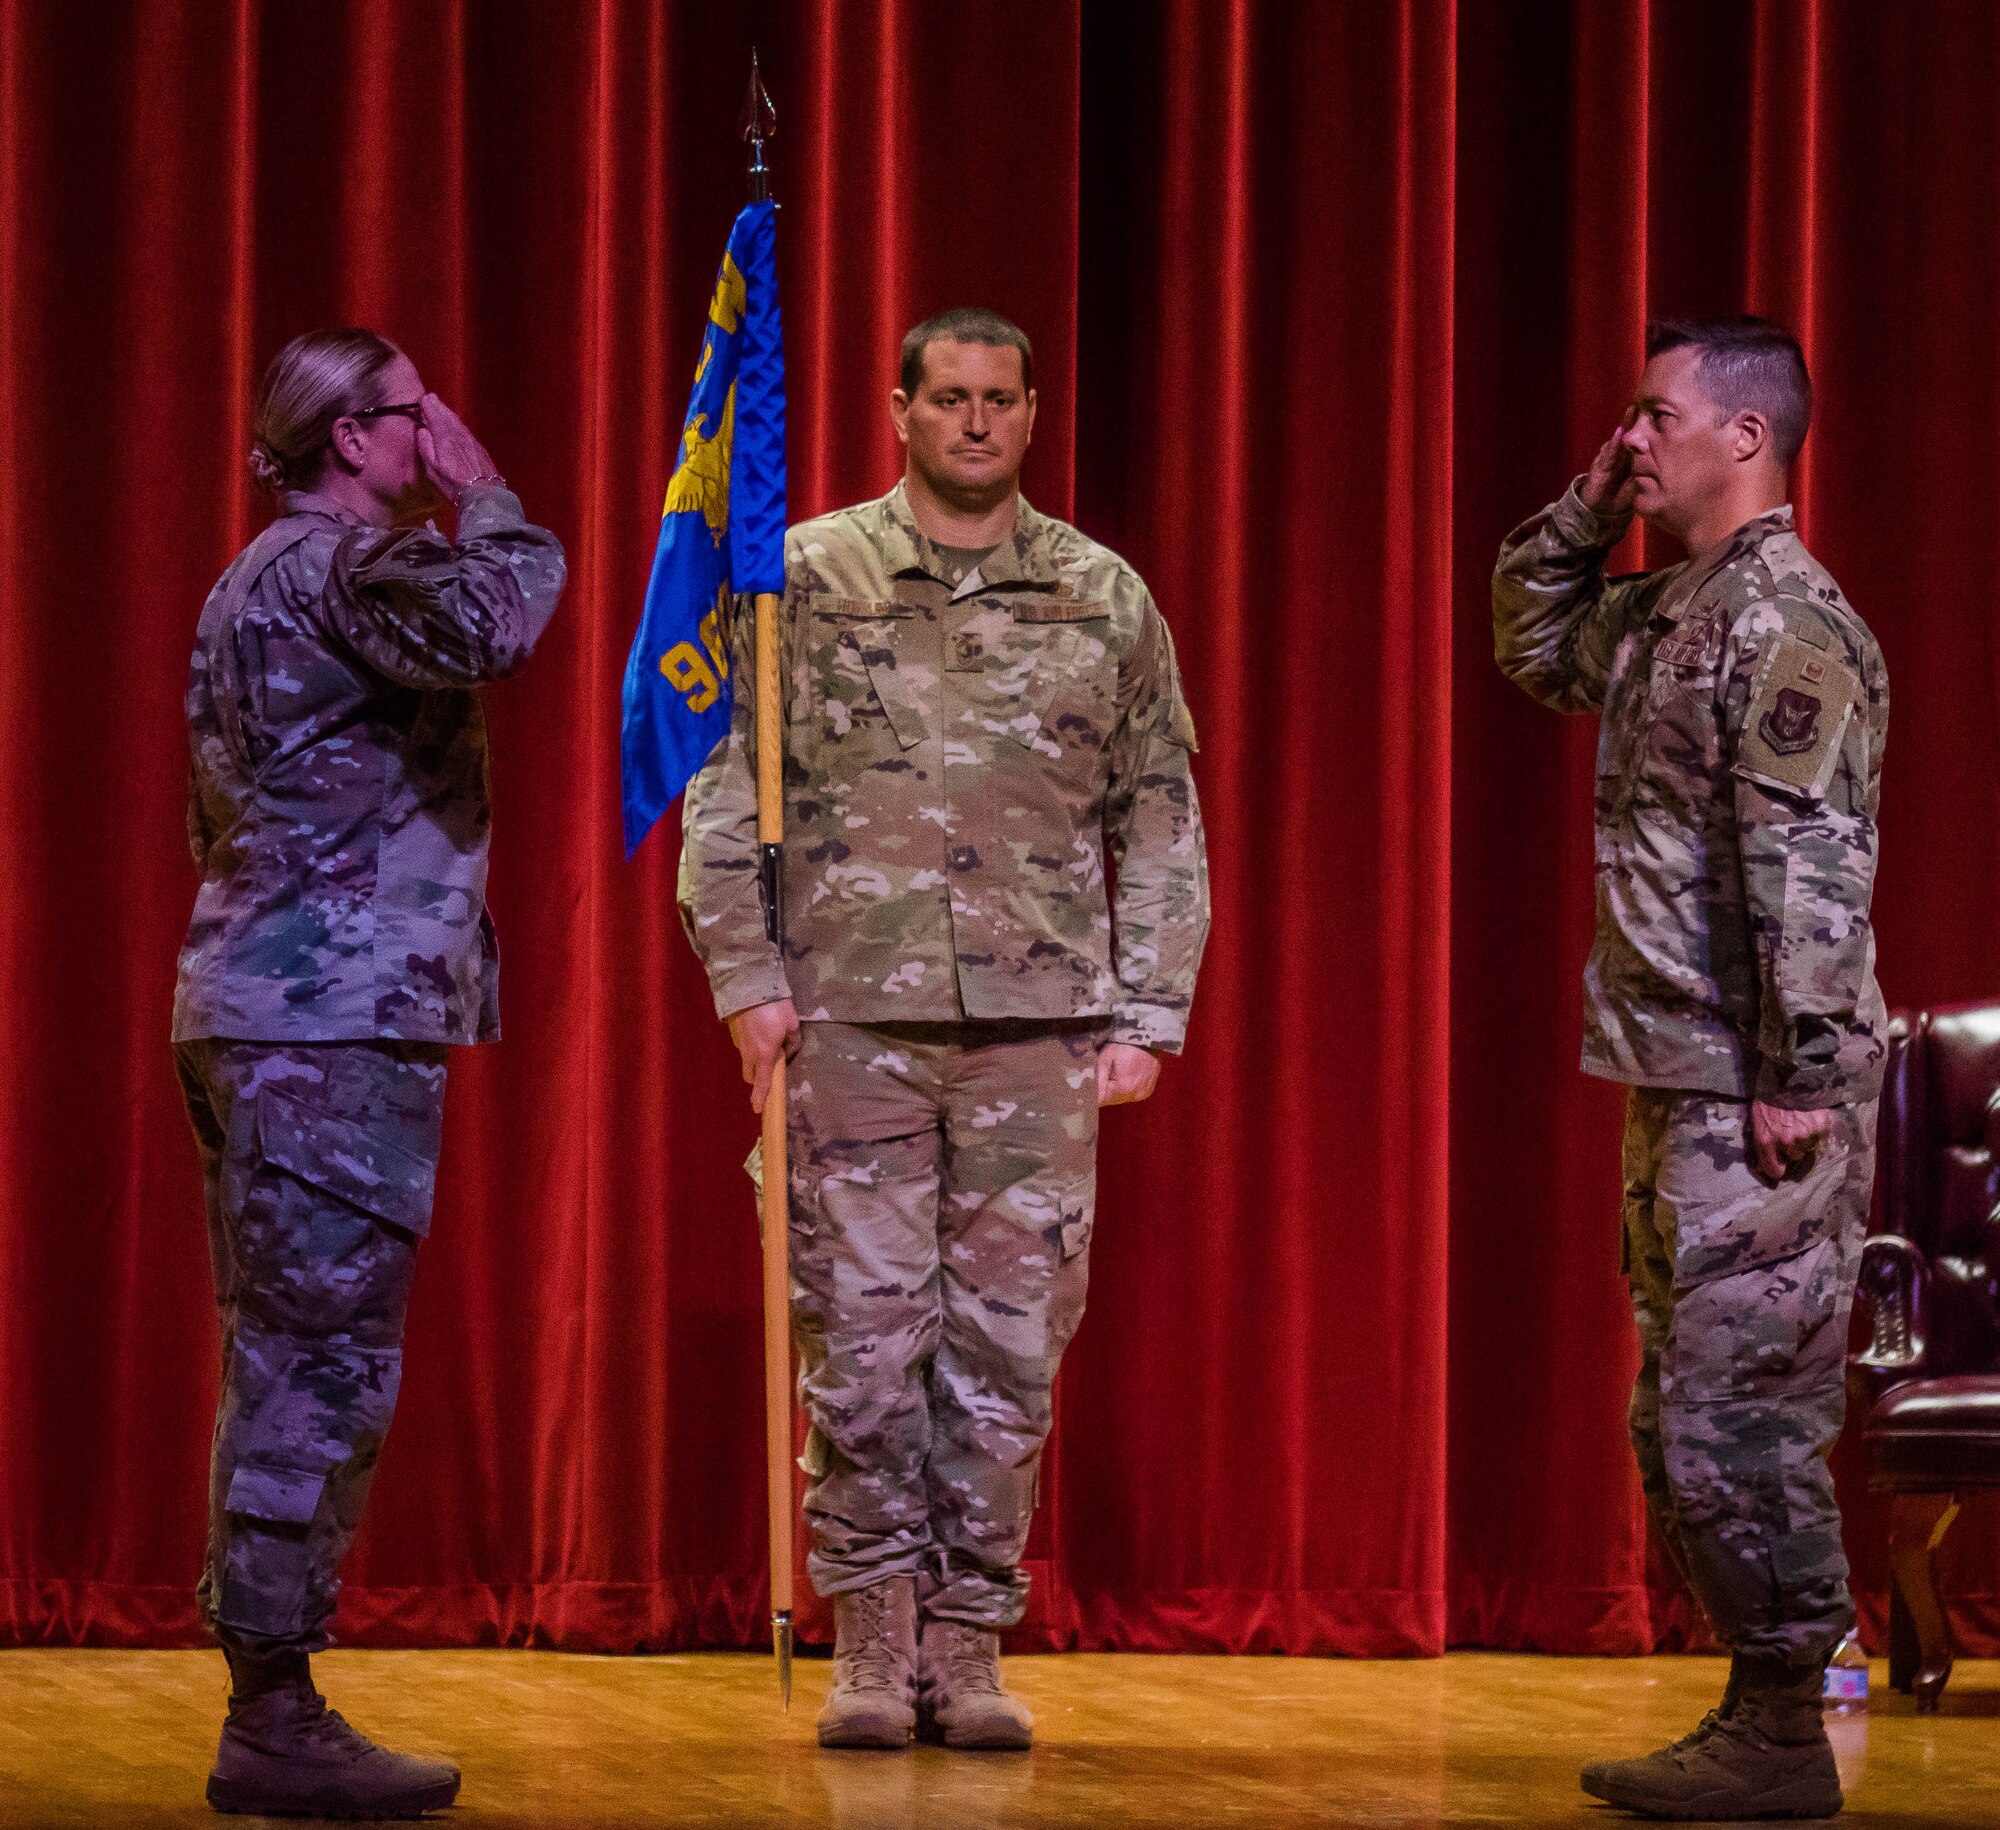 Col. Mark Estlund assumes command of the 960th Cyberspace Operations Group during a ceremony Aug. 9, 2020, at Joint Base San Antonio-Lackland, Texas, with Col. Lori Jones, 960th Cyberspace Wing commander, presiding. (U.S. Air force photo by Tech. Sgt. Christopher Brzuchalski)